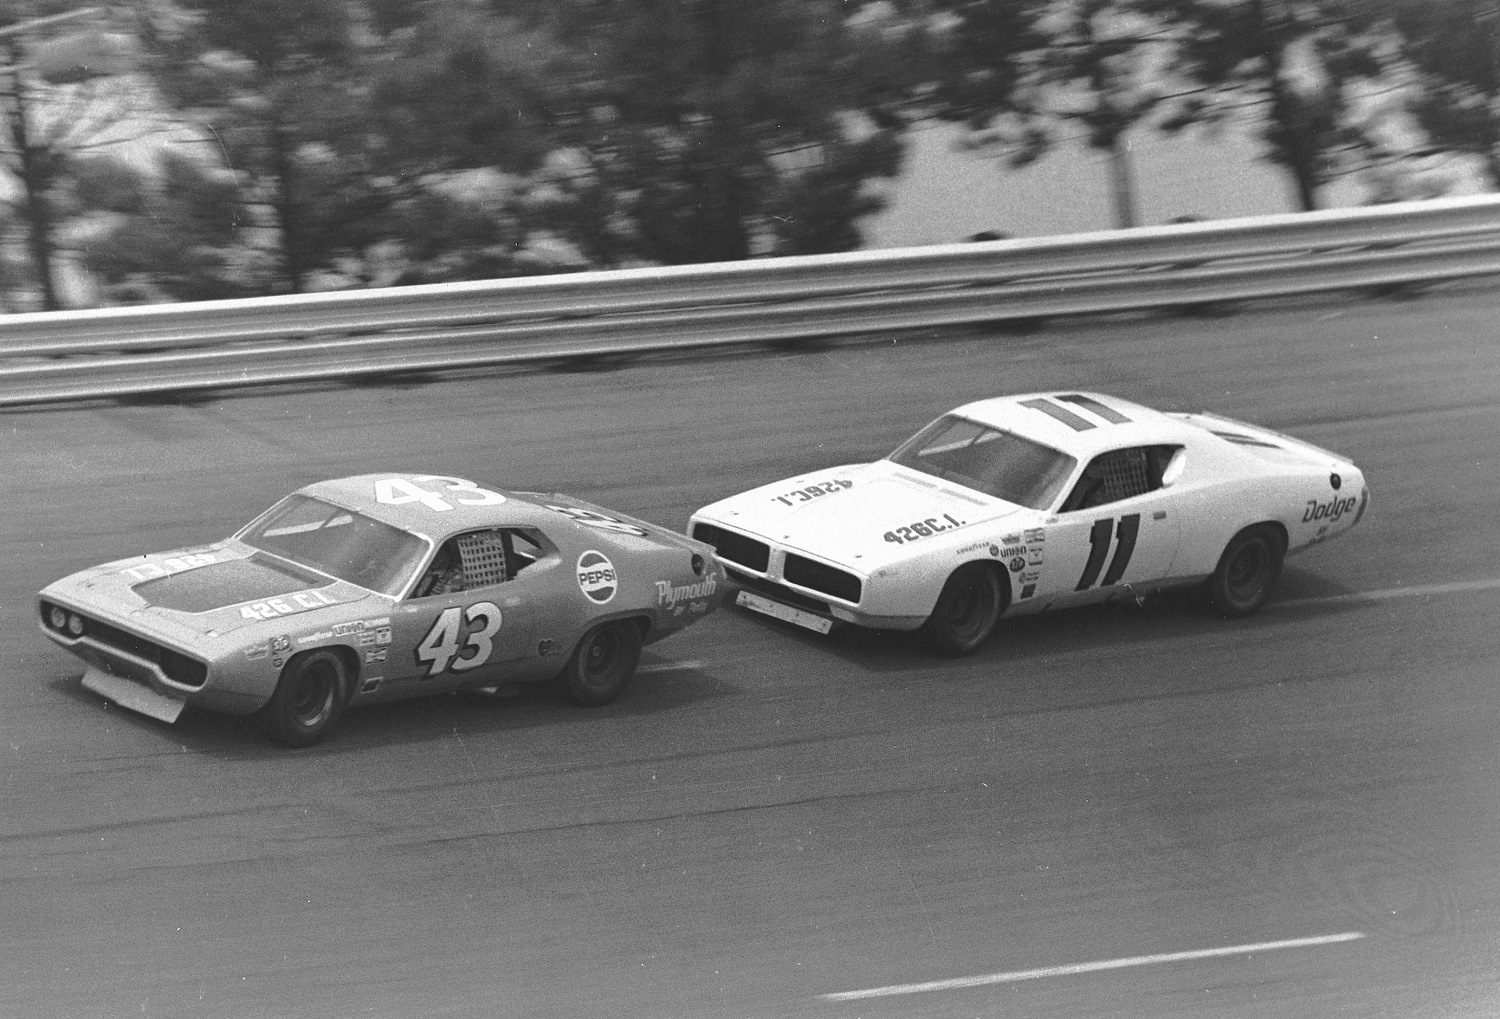 Richard Petty leads teammate Buddy Baker during the Dixie 500 NASCAR Cup race at Atlanta International Raceway in 1971, the last year the NASCAR used ultra-short tracks like the Busch Light Clash oval at the Los Angeles Coliseum.